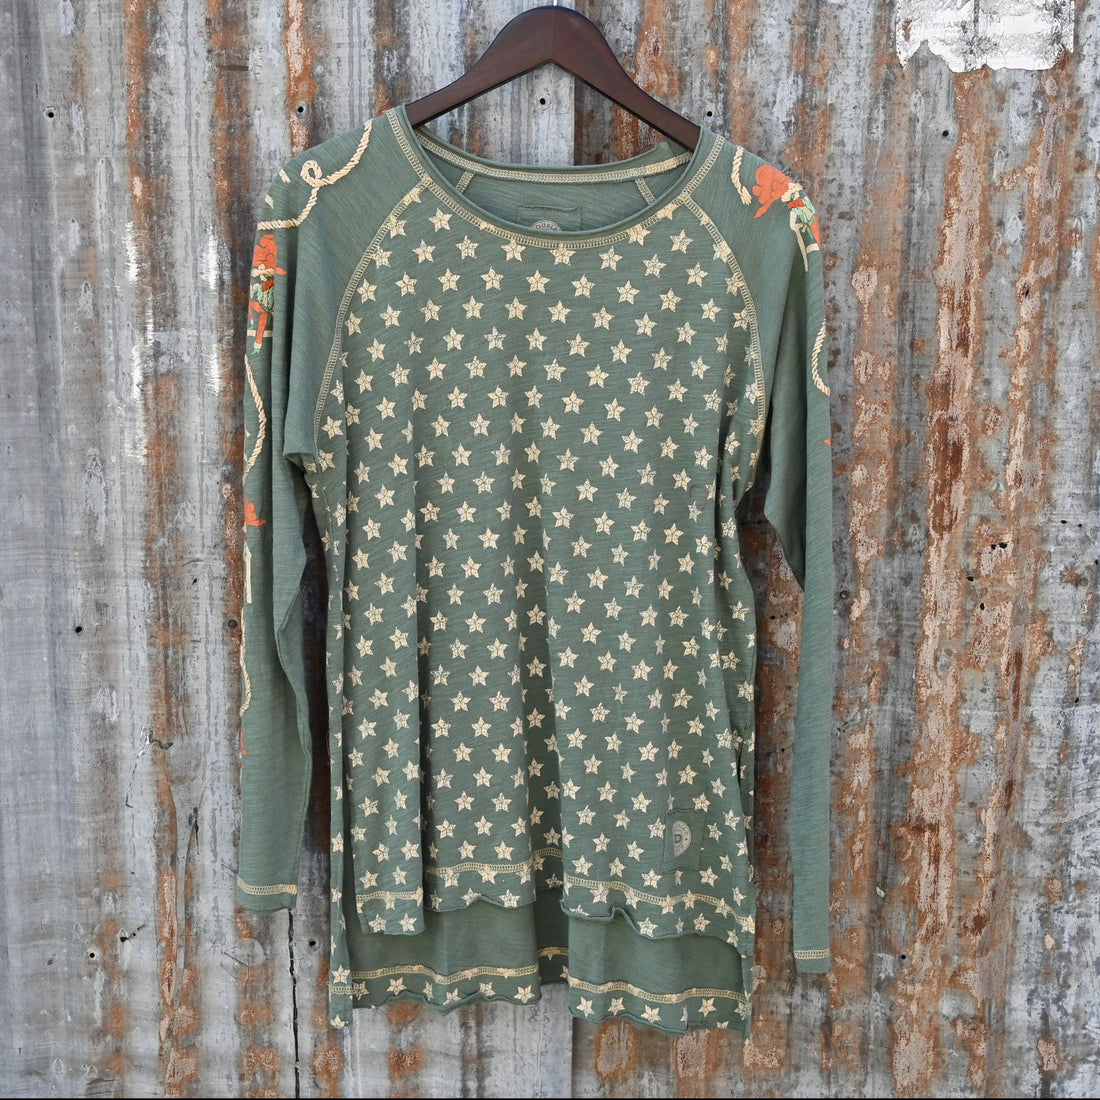 Double D Ranch Cowboys Up My Sleeve Top in Garcitas Green front view